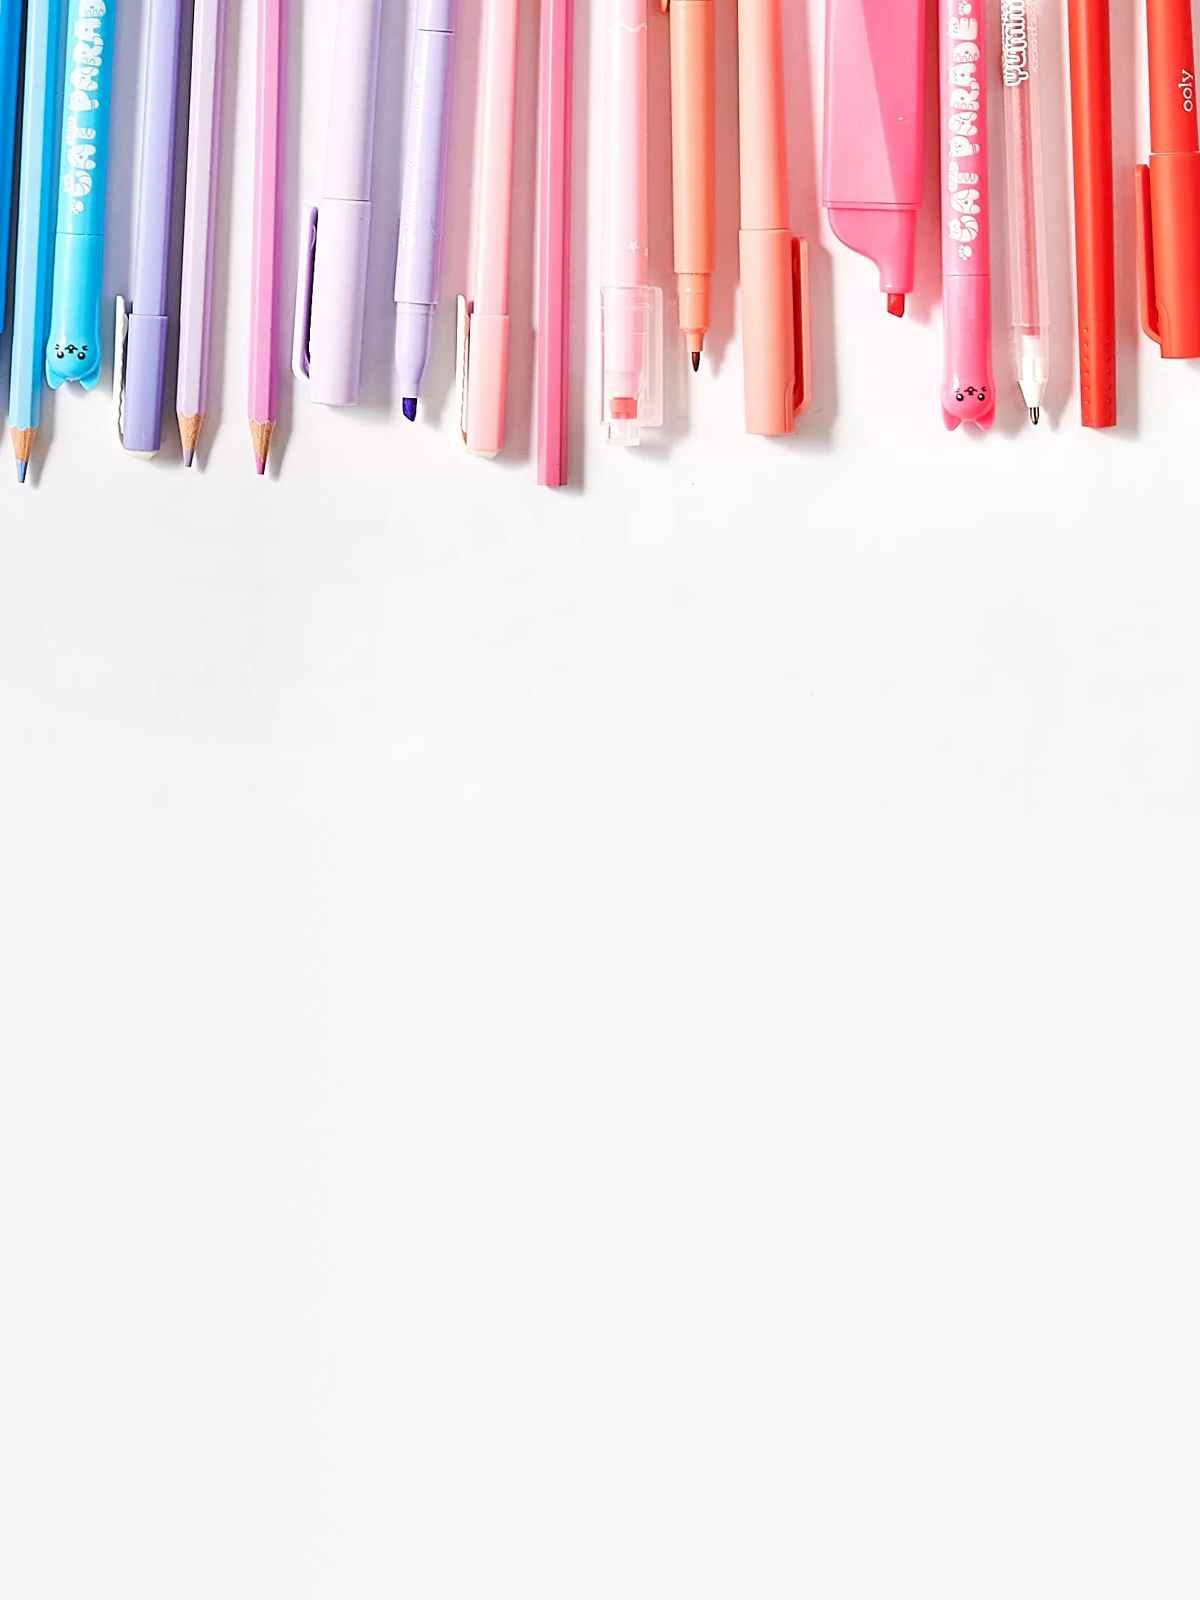 From Cute to Quirky, These Cool Pencils Let You Write in Style